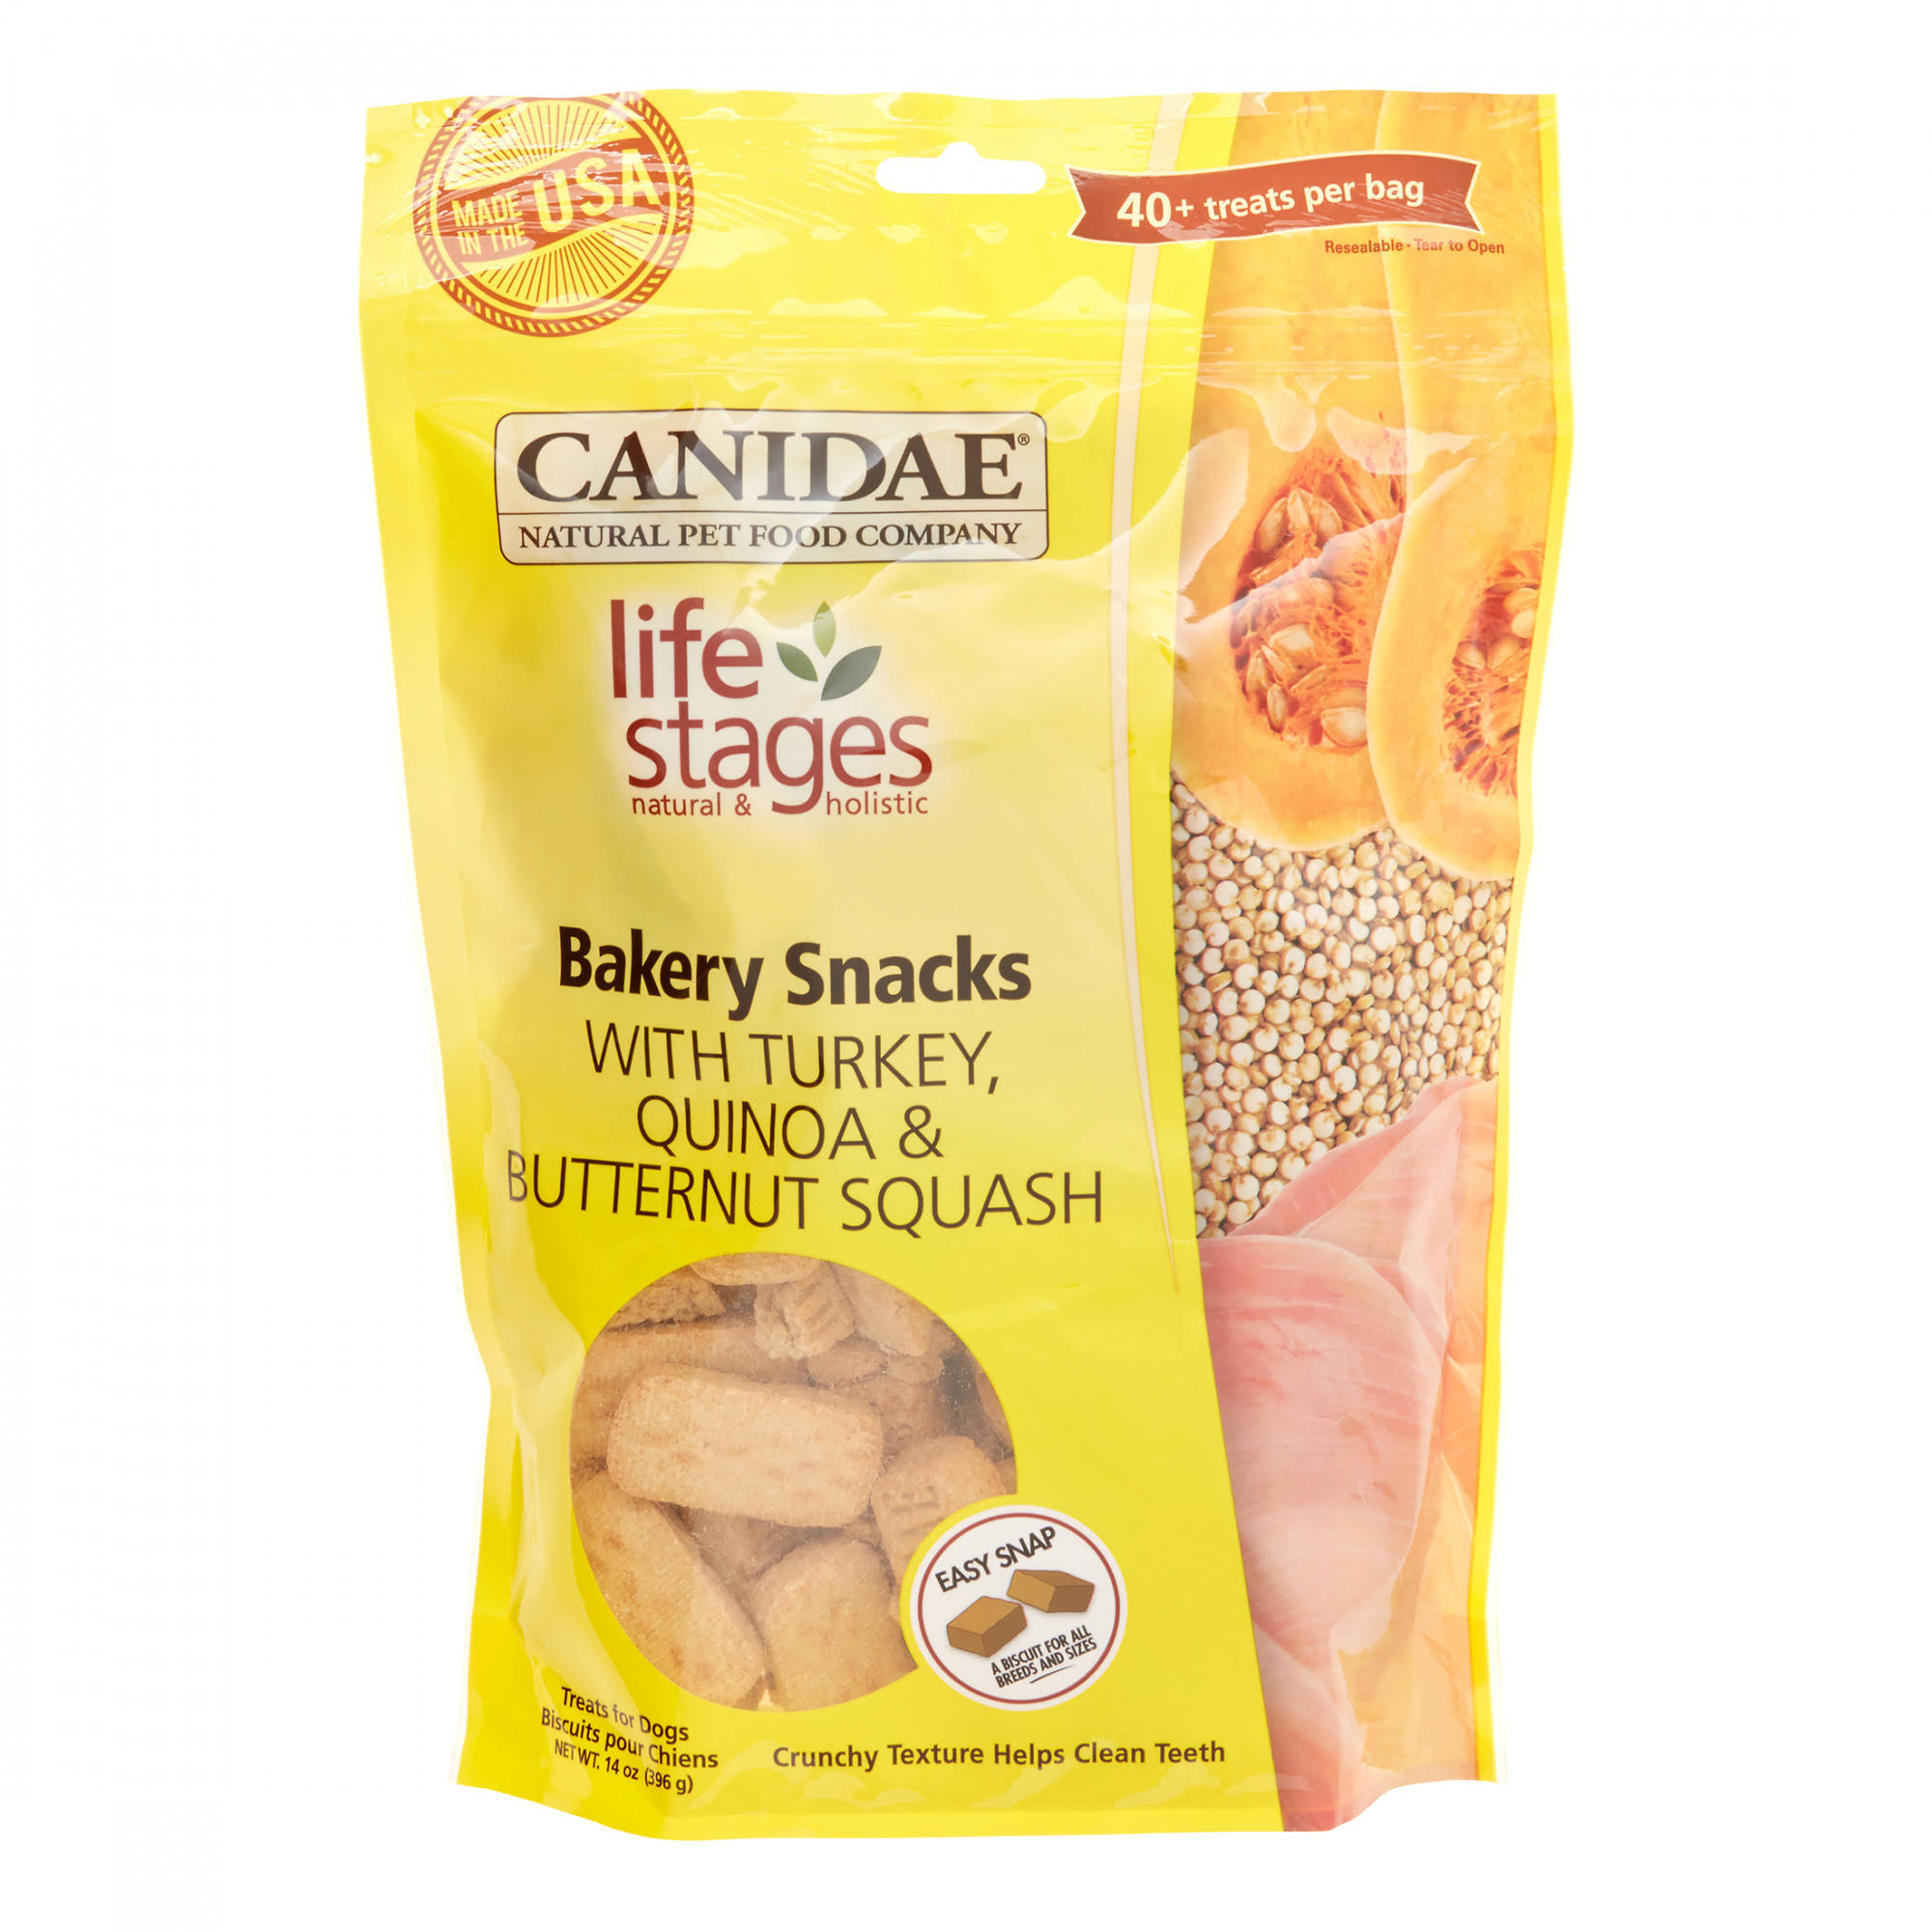 Canidae Life Stages Bakery Snacks - Turkey Quinoa & Butternut Squash